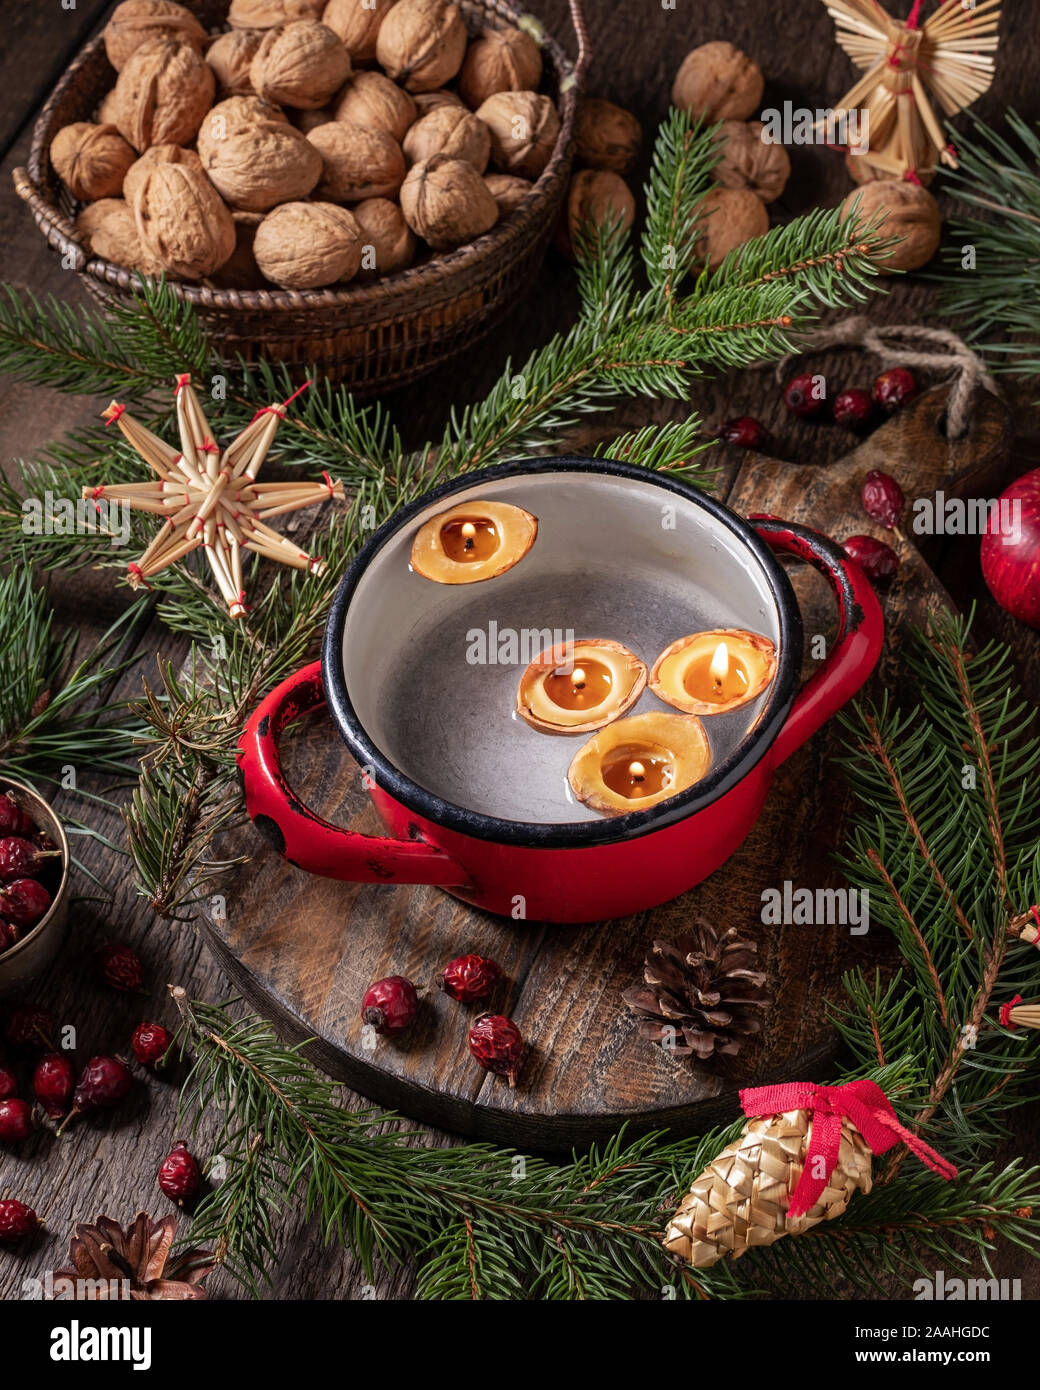 Candles made from nut shells floating in water - old Christmas custom Stock Photo